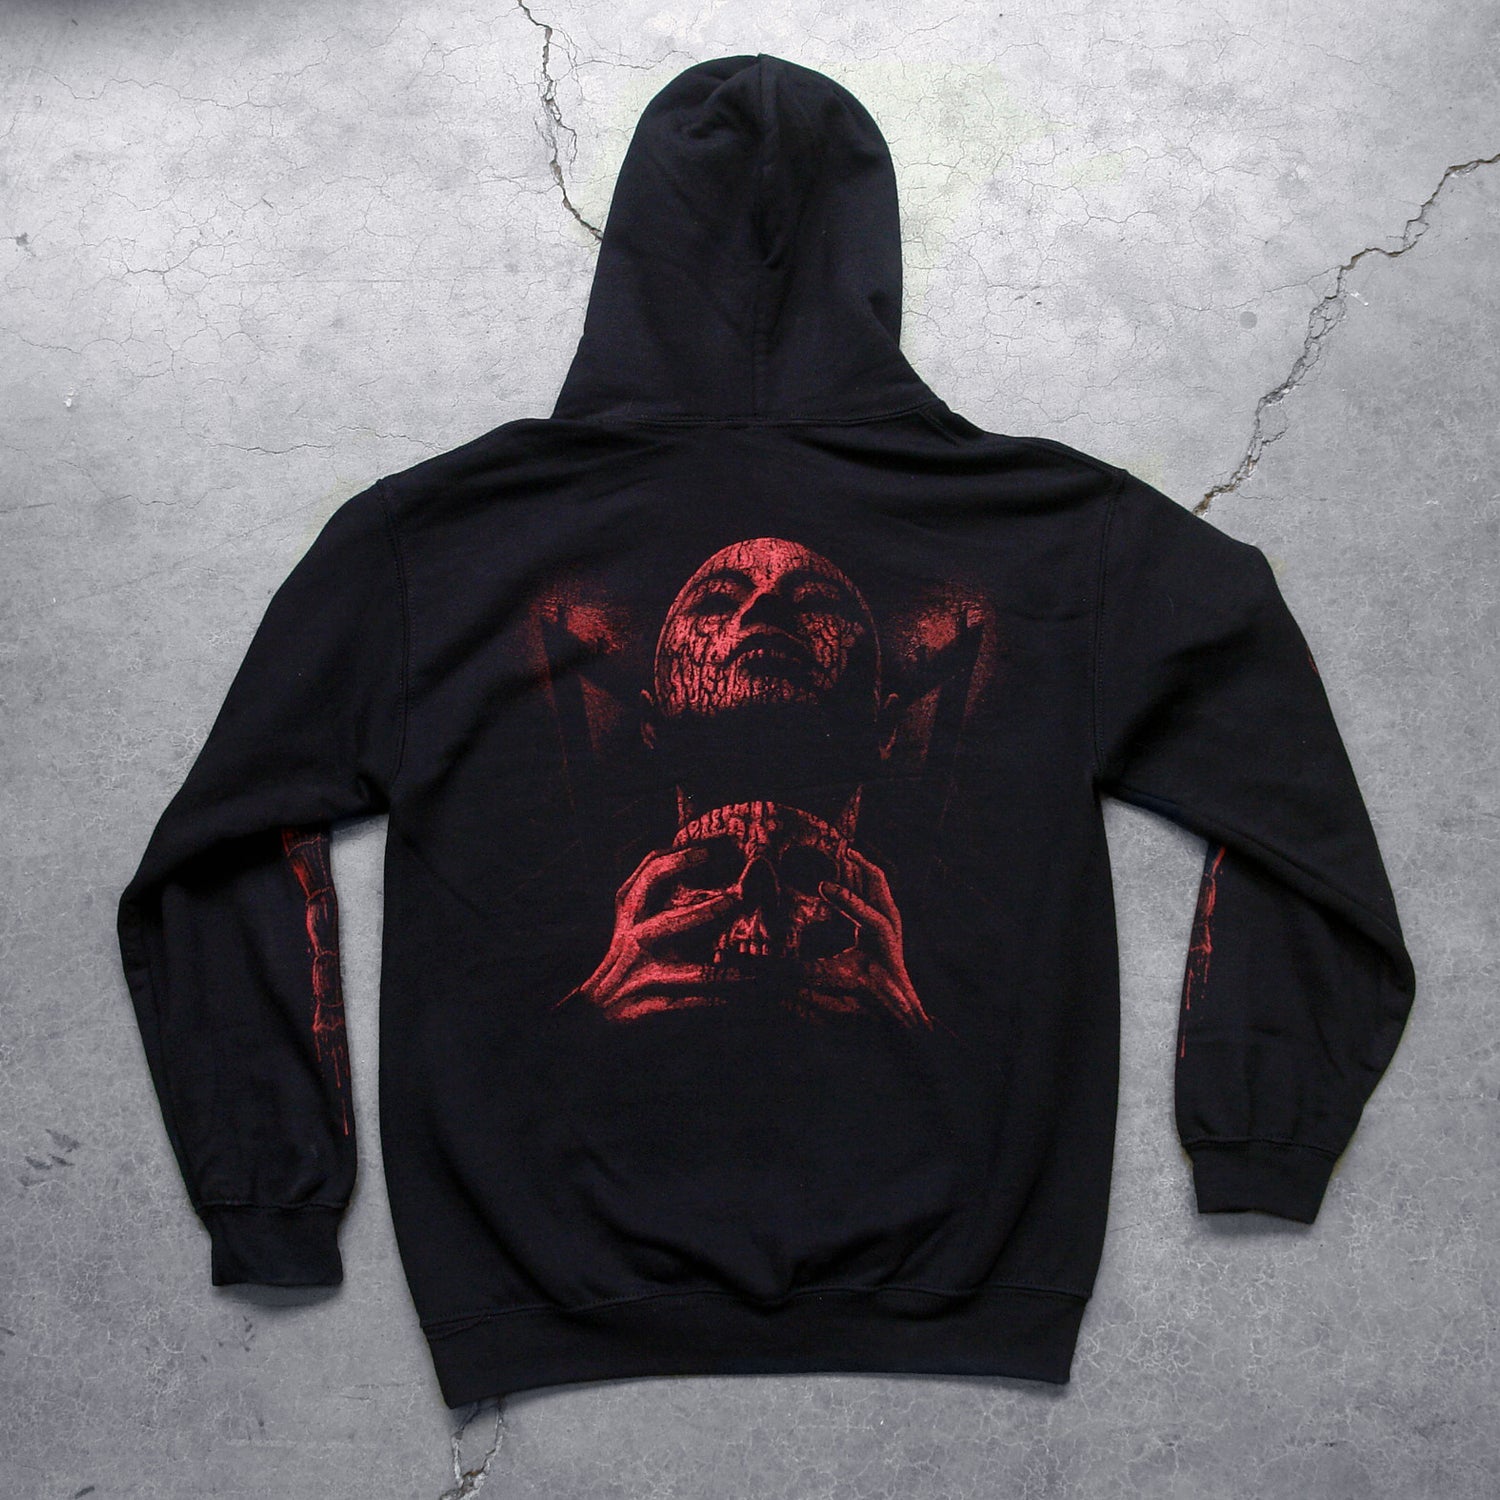  Image of the back of a black hoodie against a concrete grey background.  There is a red graphic of a person's face with their eyes closed, head up. They have blood on them and are clutching a skull.  The sleeves feature red graphics that are abstract and drip blood.